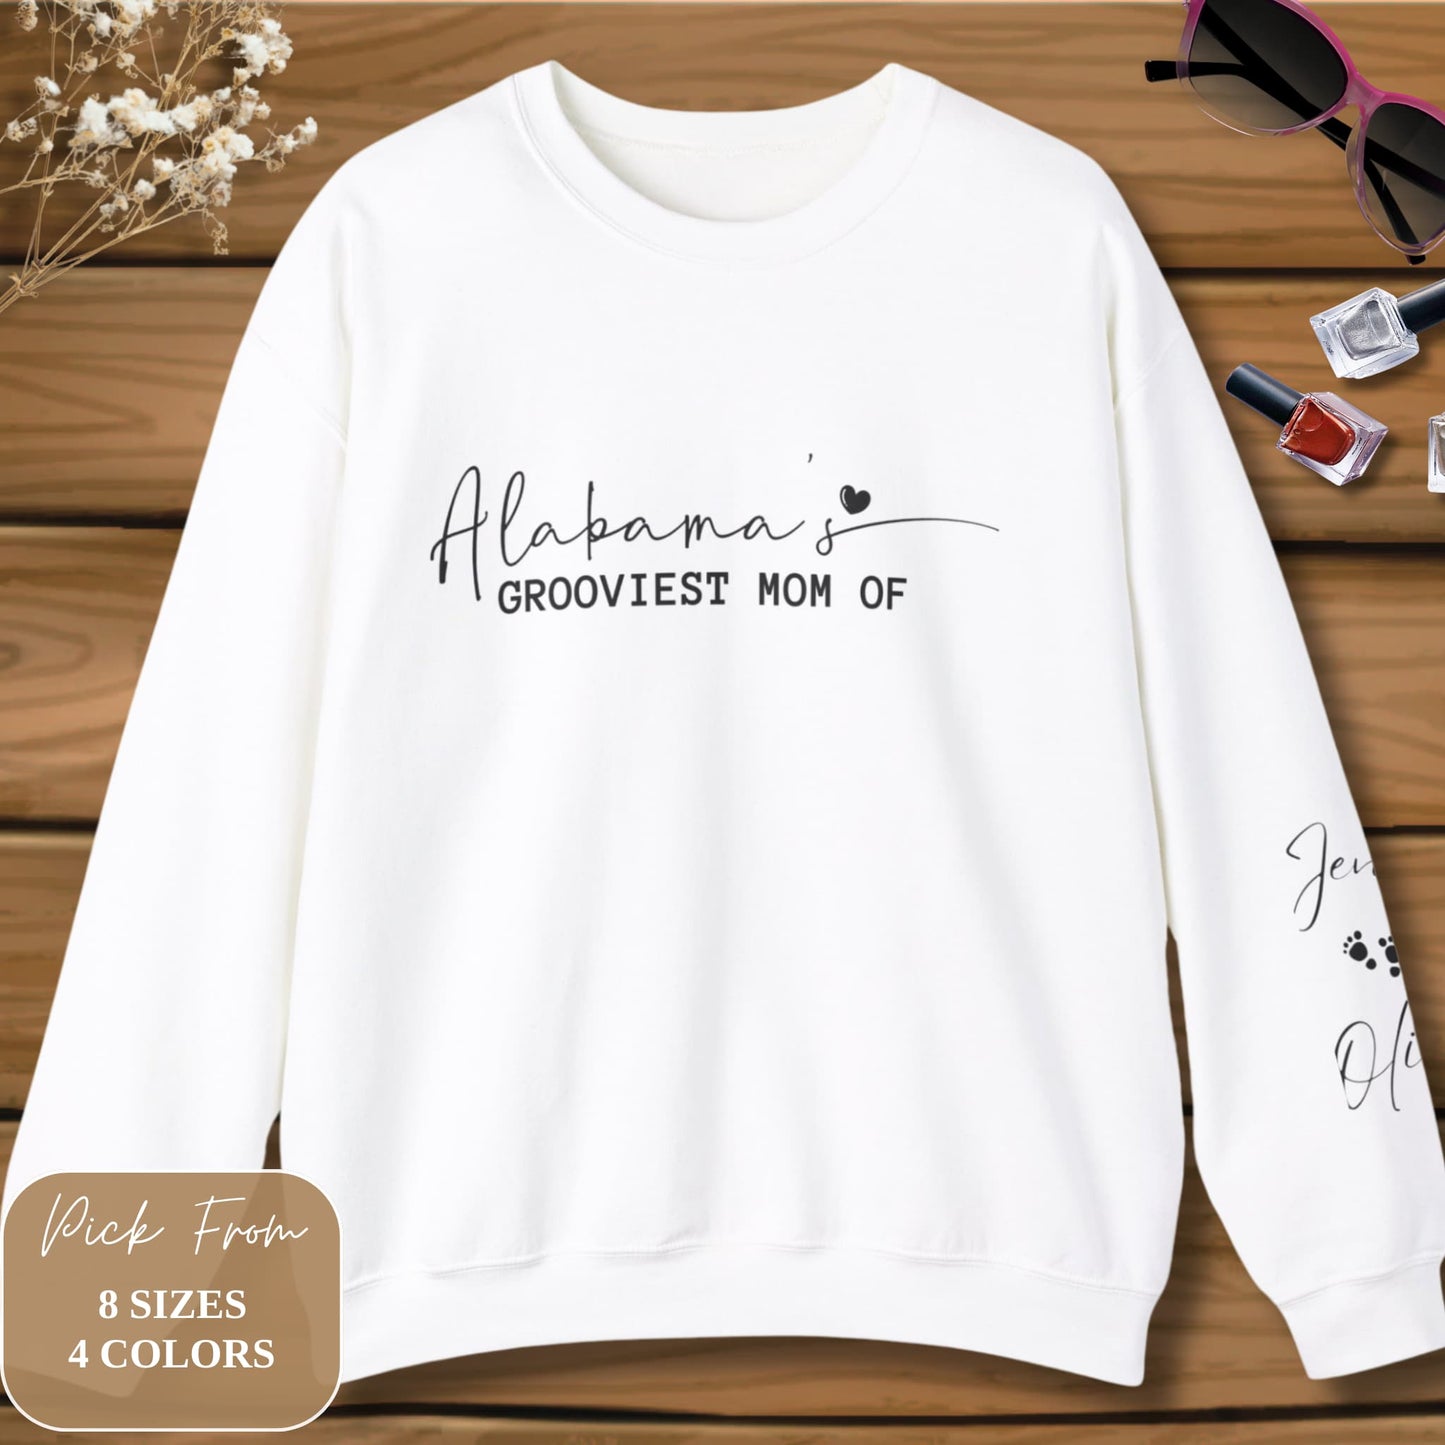 Alabama's Custom Mom Crewneck Sweatshirt displayed on a wooden surface, complemented by flowers and women's accessories in a stylish flatlay.